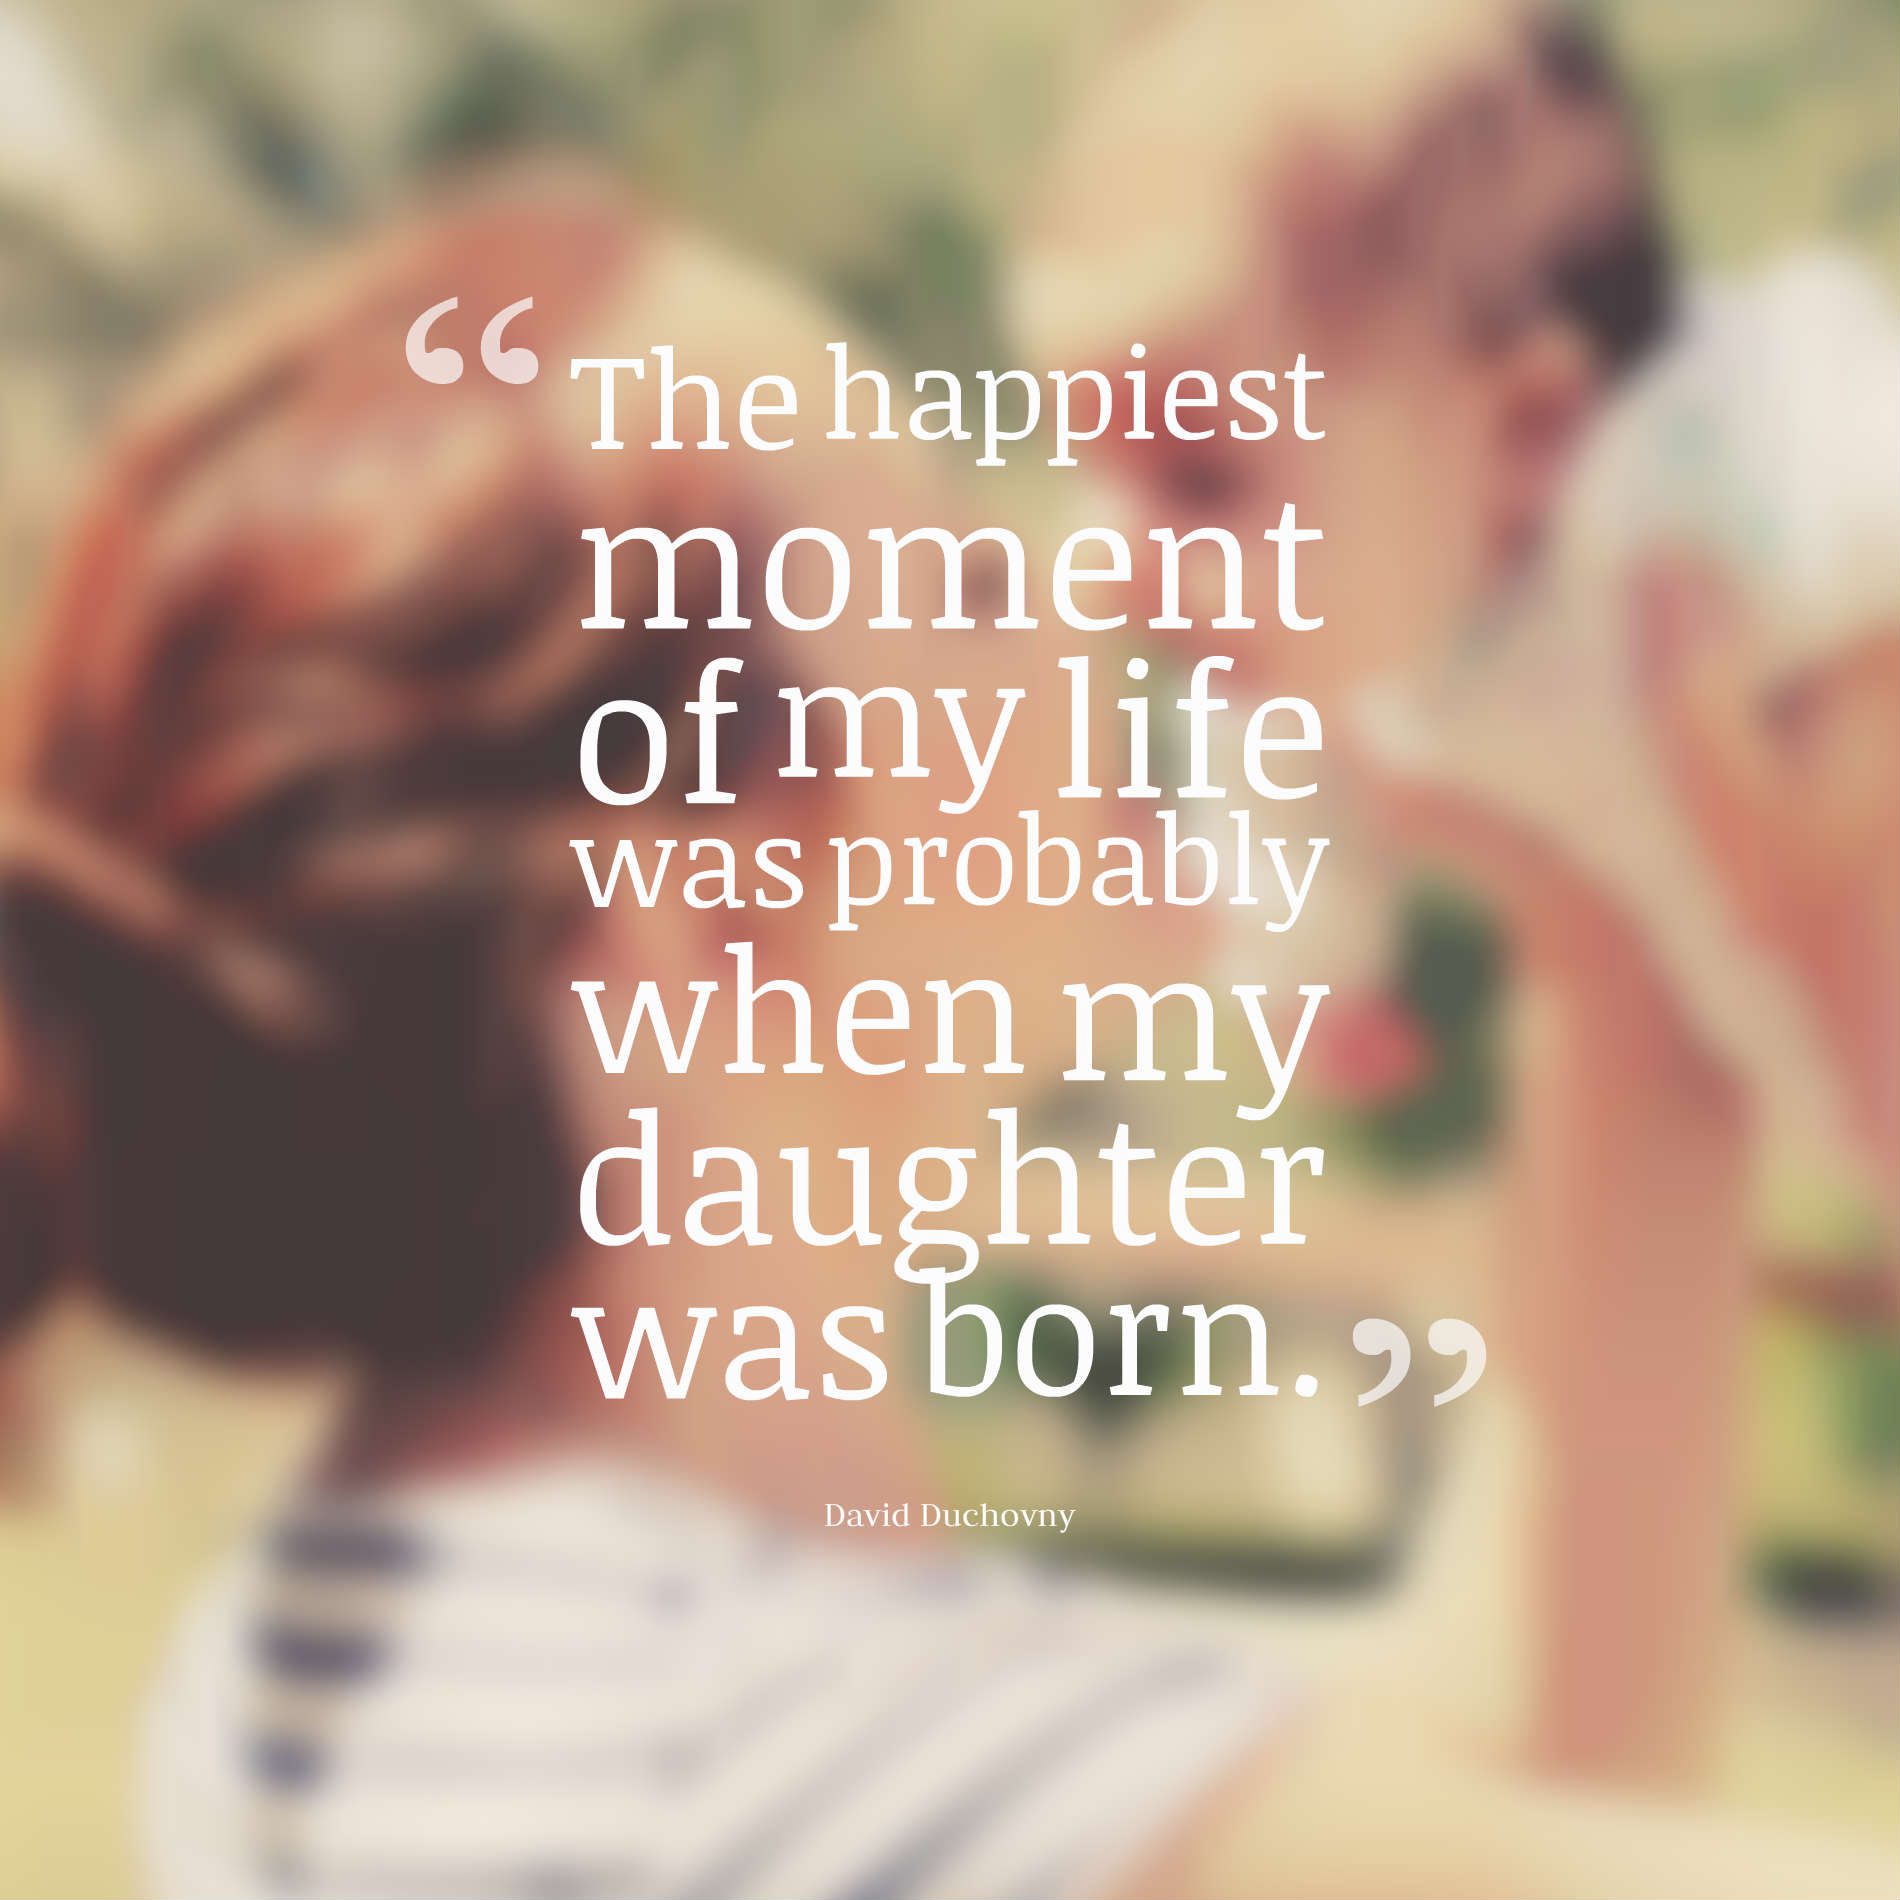 The happiest moment of my life was probably when my daughter was born.